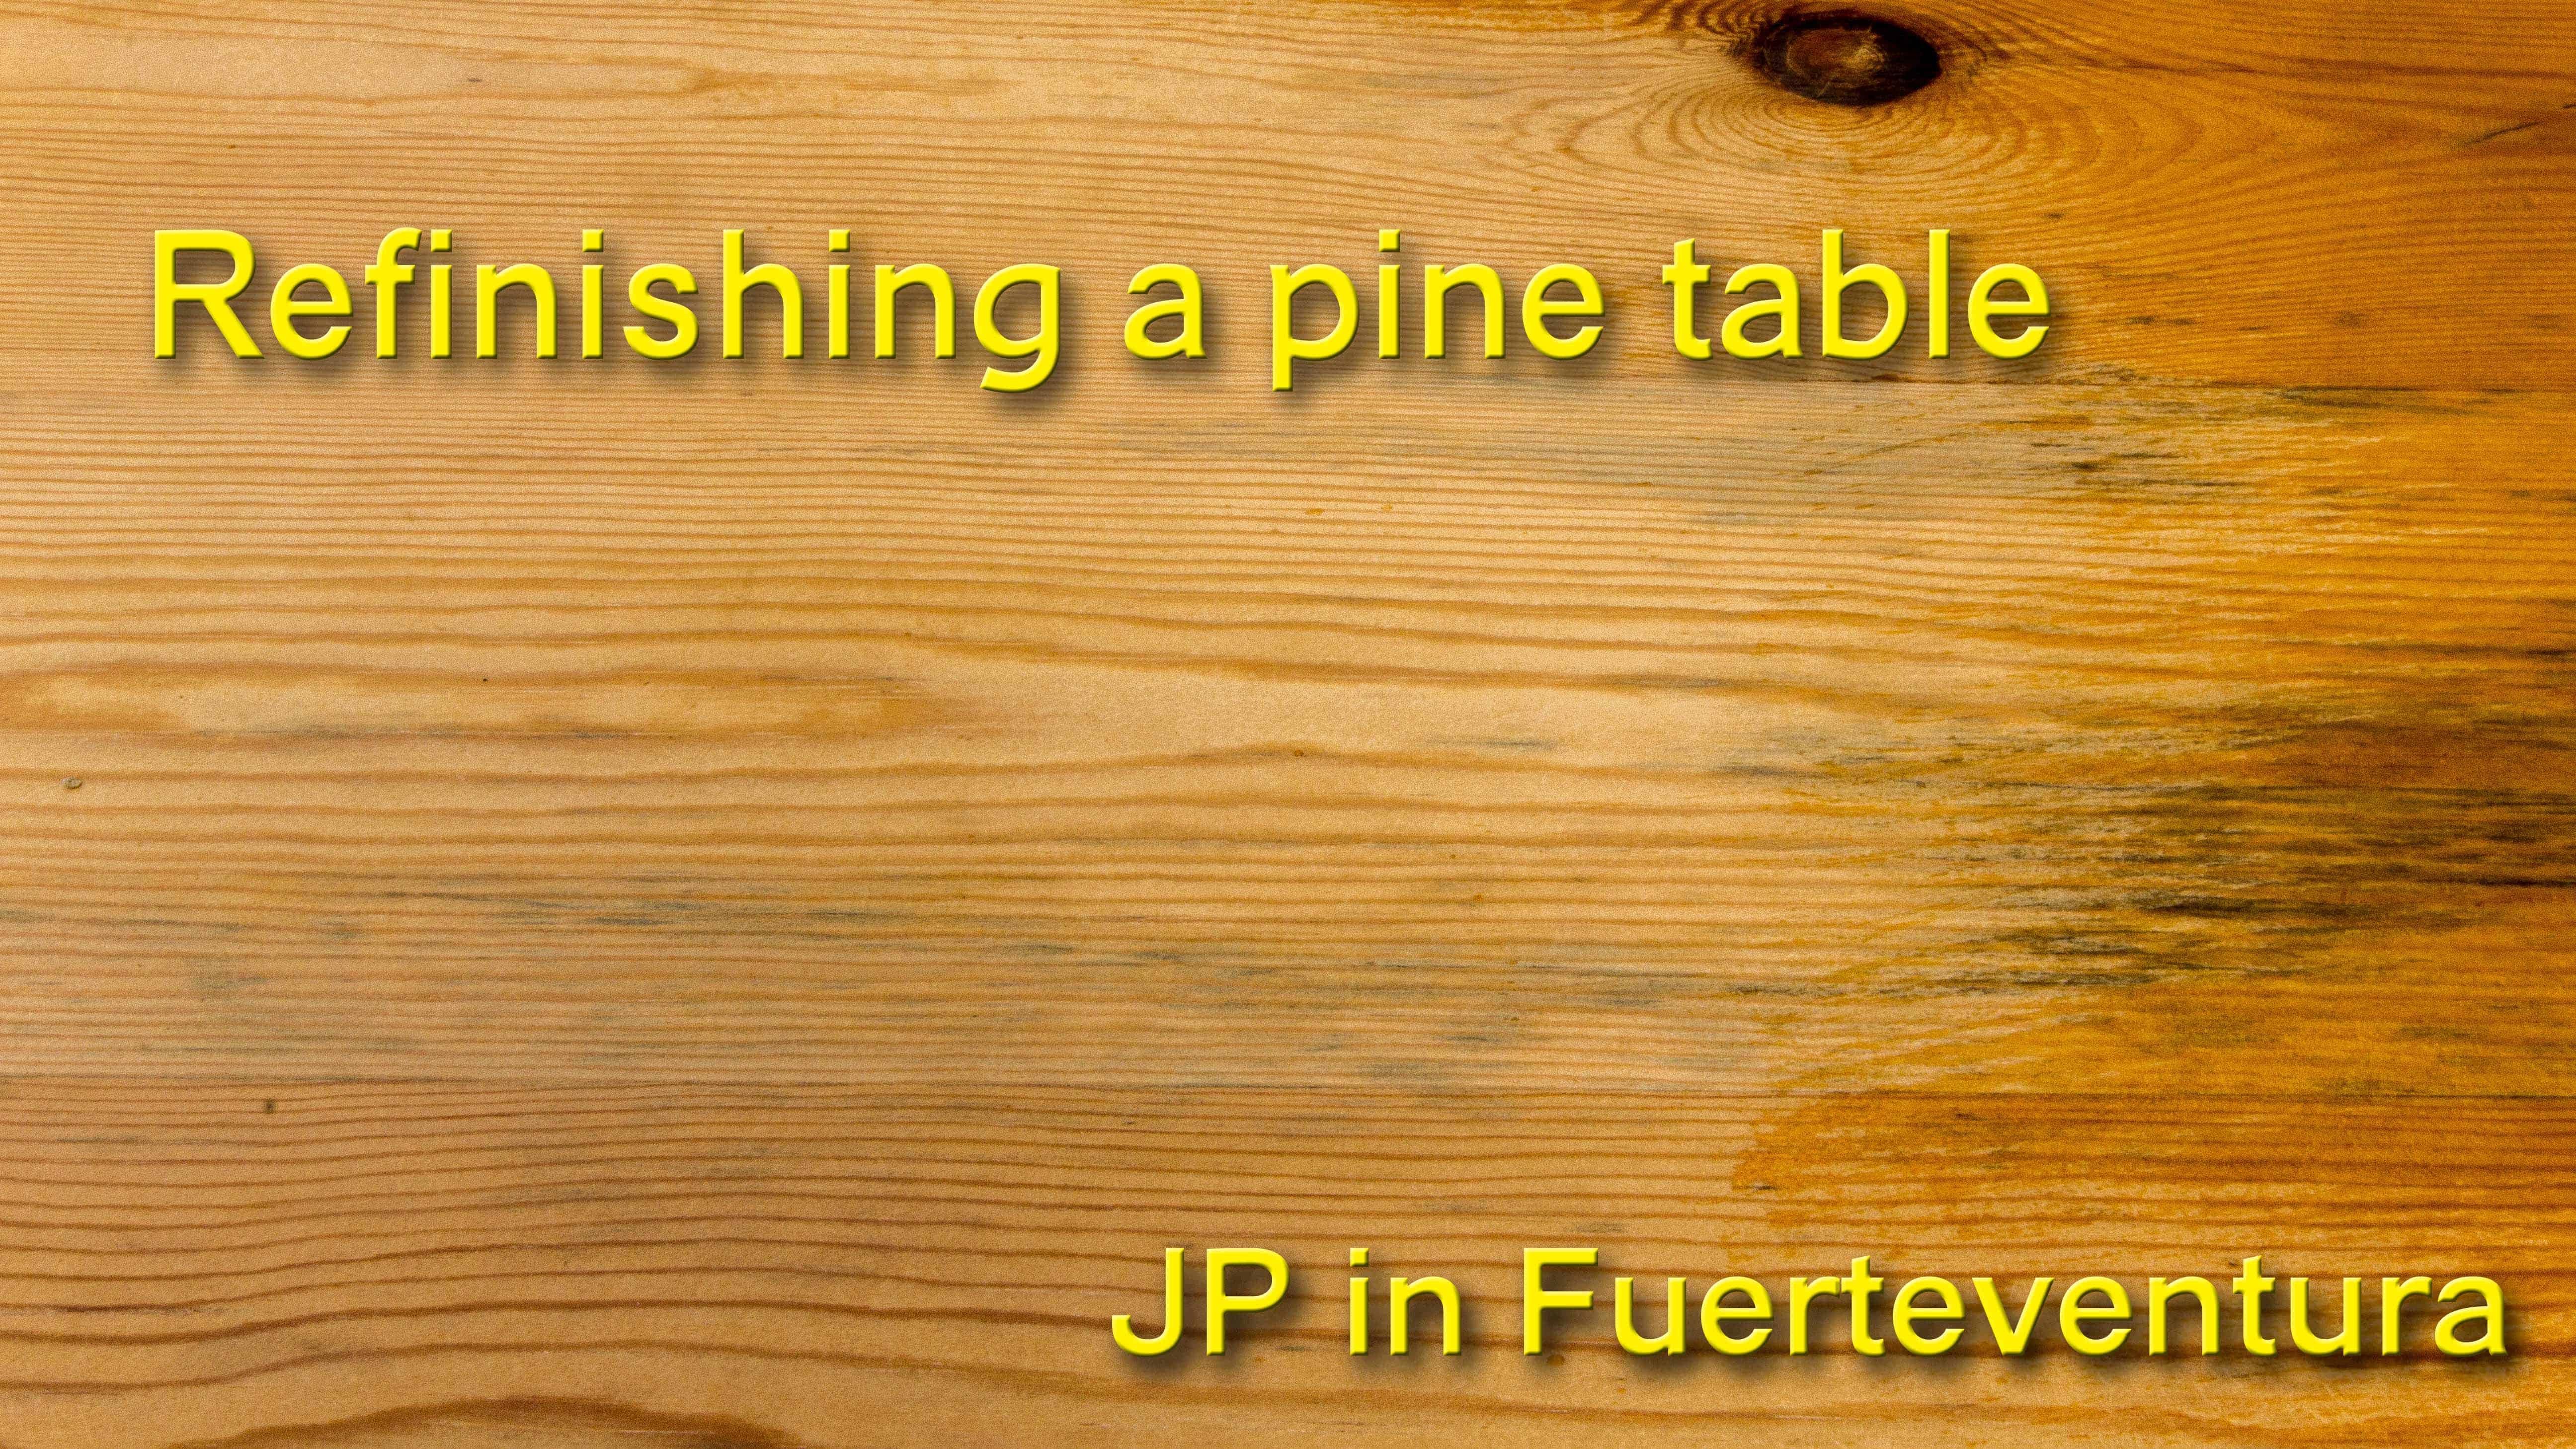 Refinishing a pine table